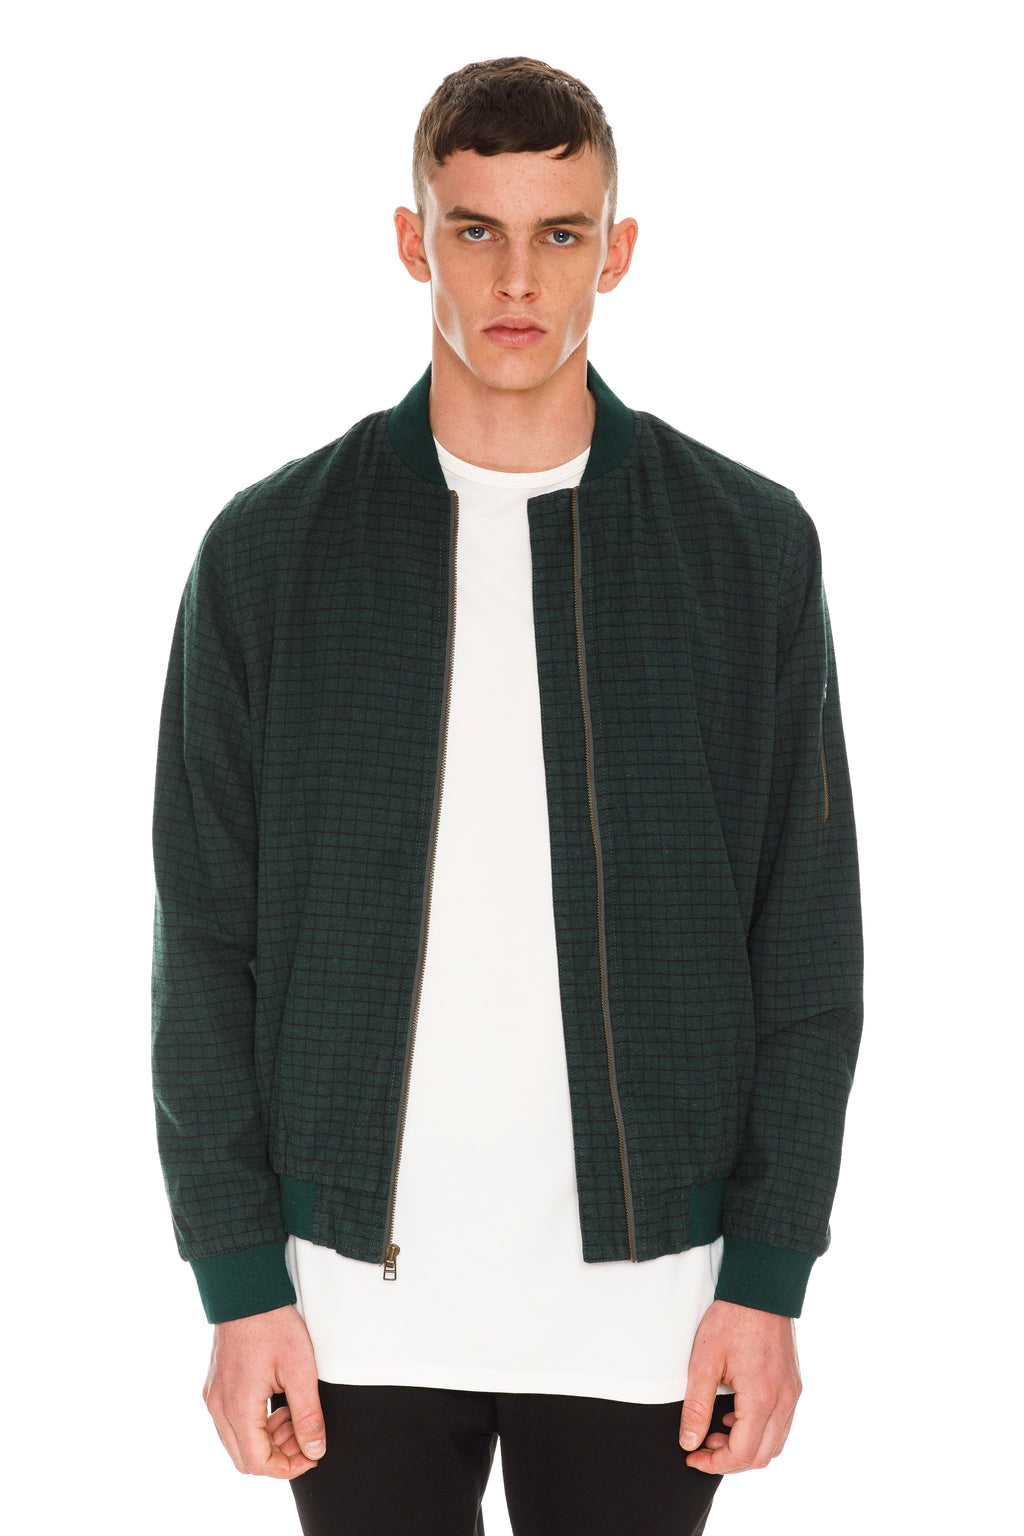 Velvet Green Checkered Bomber - Featuring Copper-Washed Custom Moulded "Rarefied" Buttons